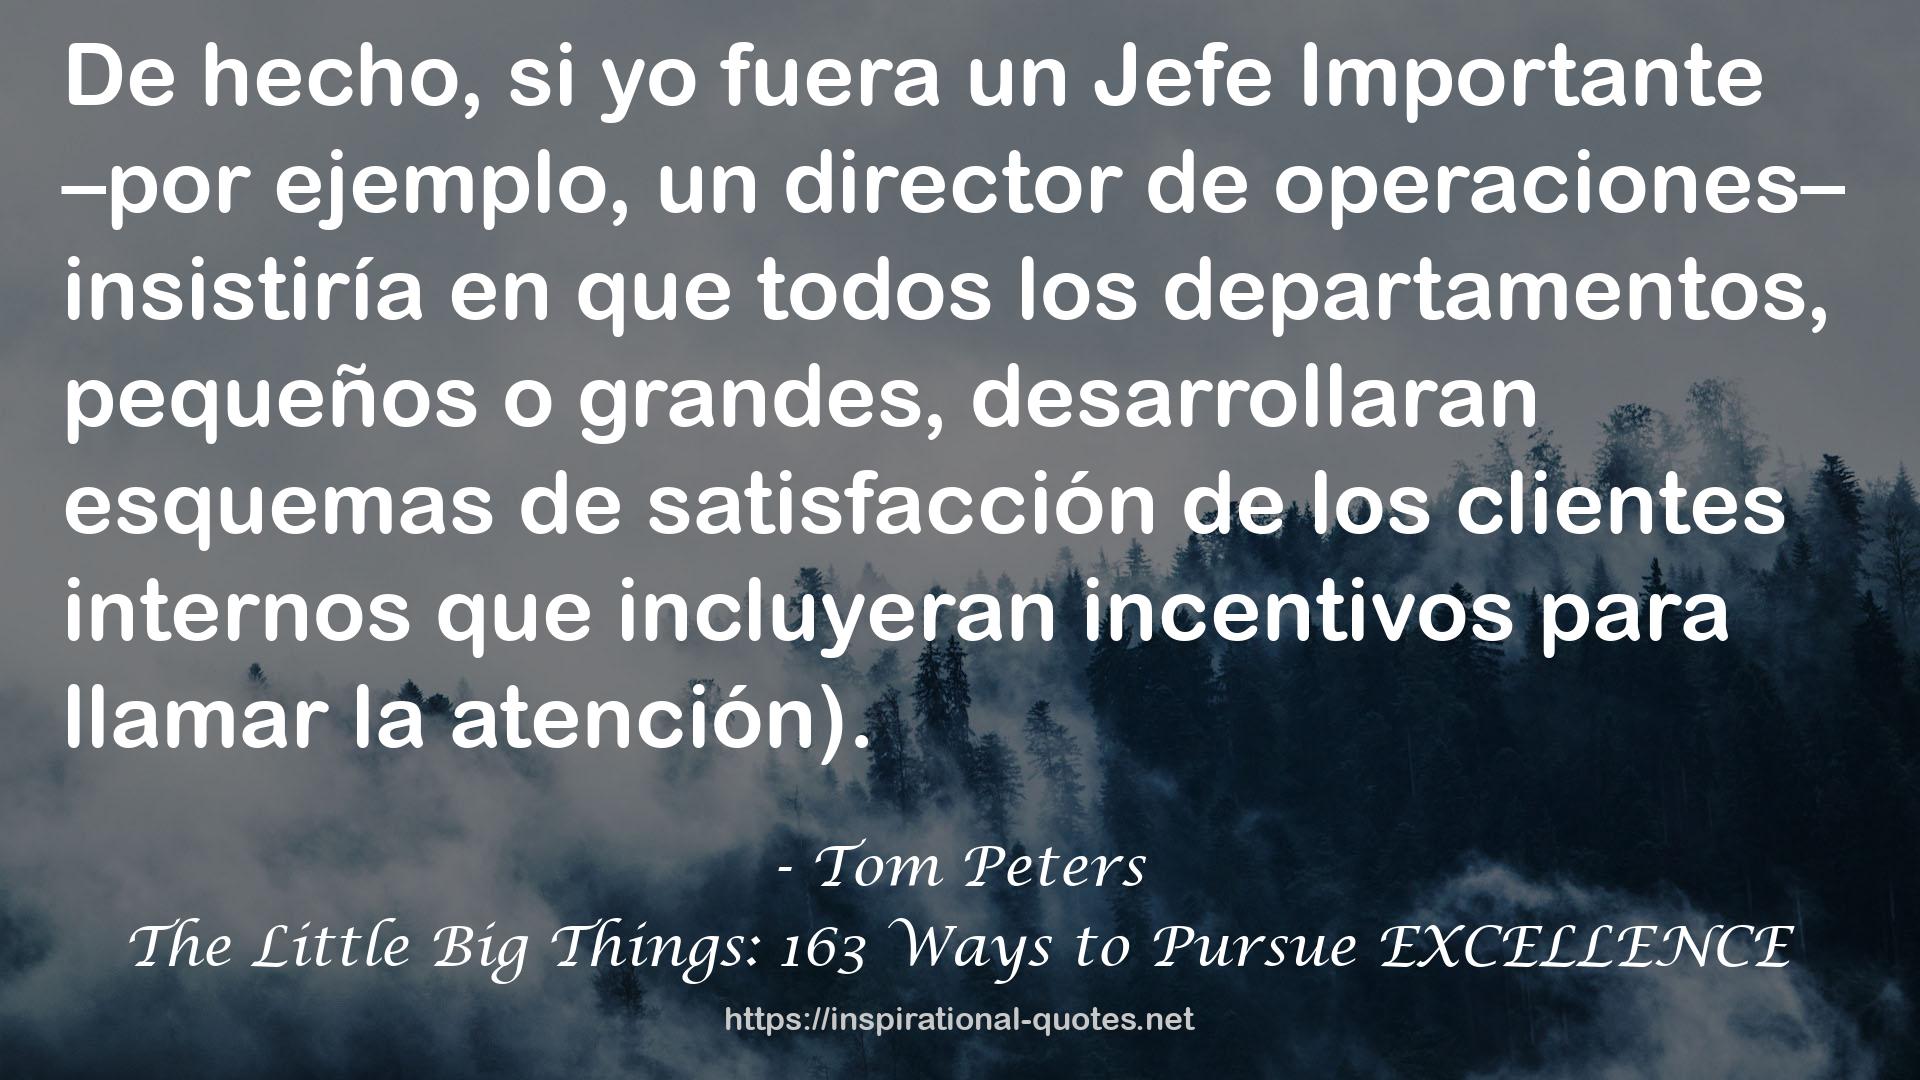 The Little Big Things: 163 Ways to Pursue EXCELLENCE QUOTES